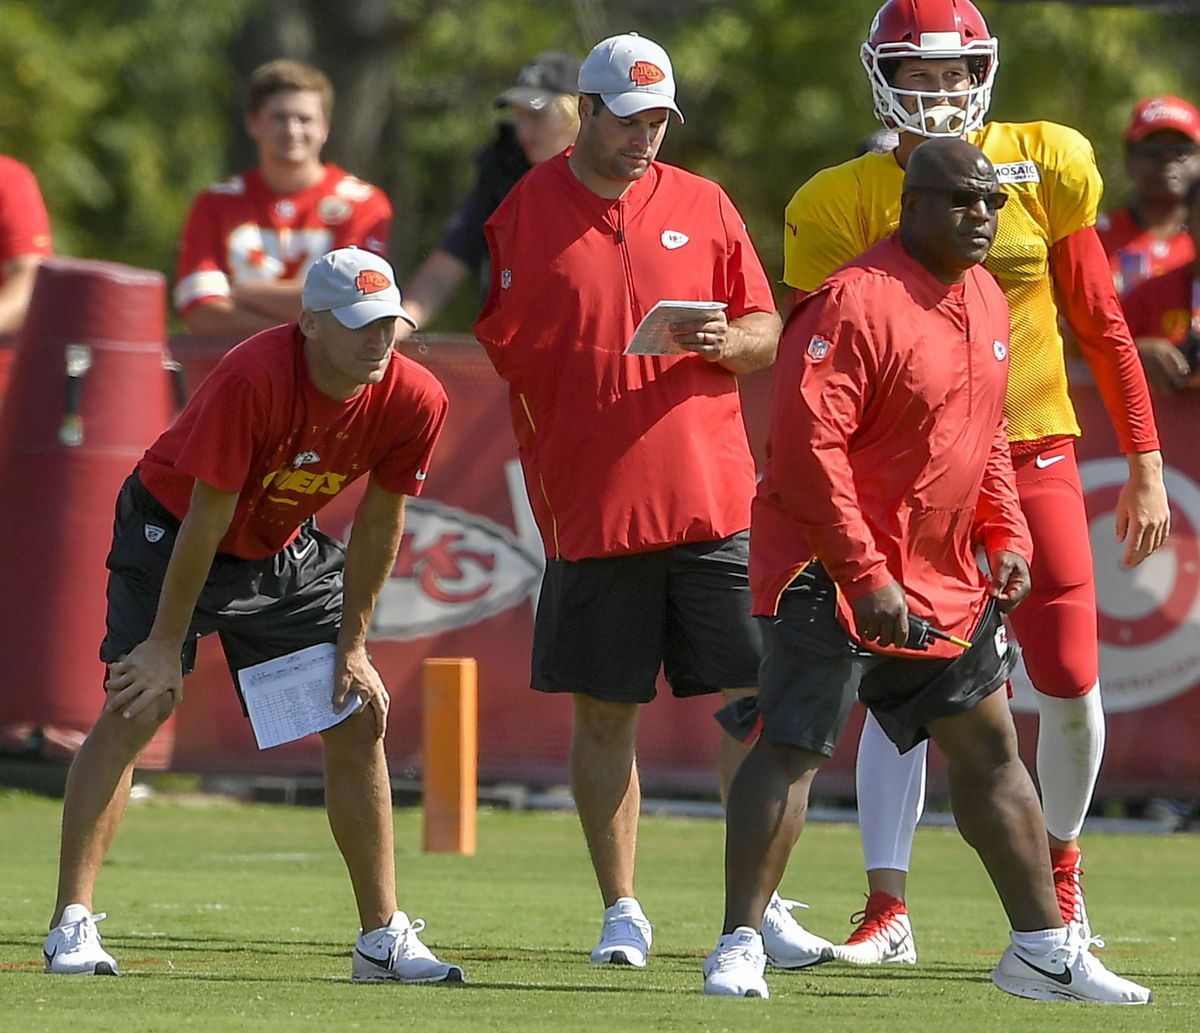 Losing an arm helped make this Chiefs assistant coach who he is